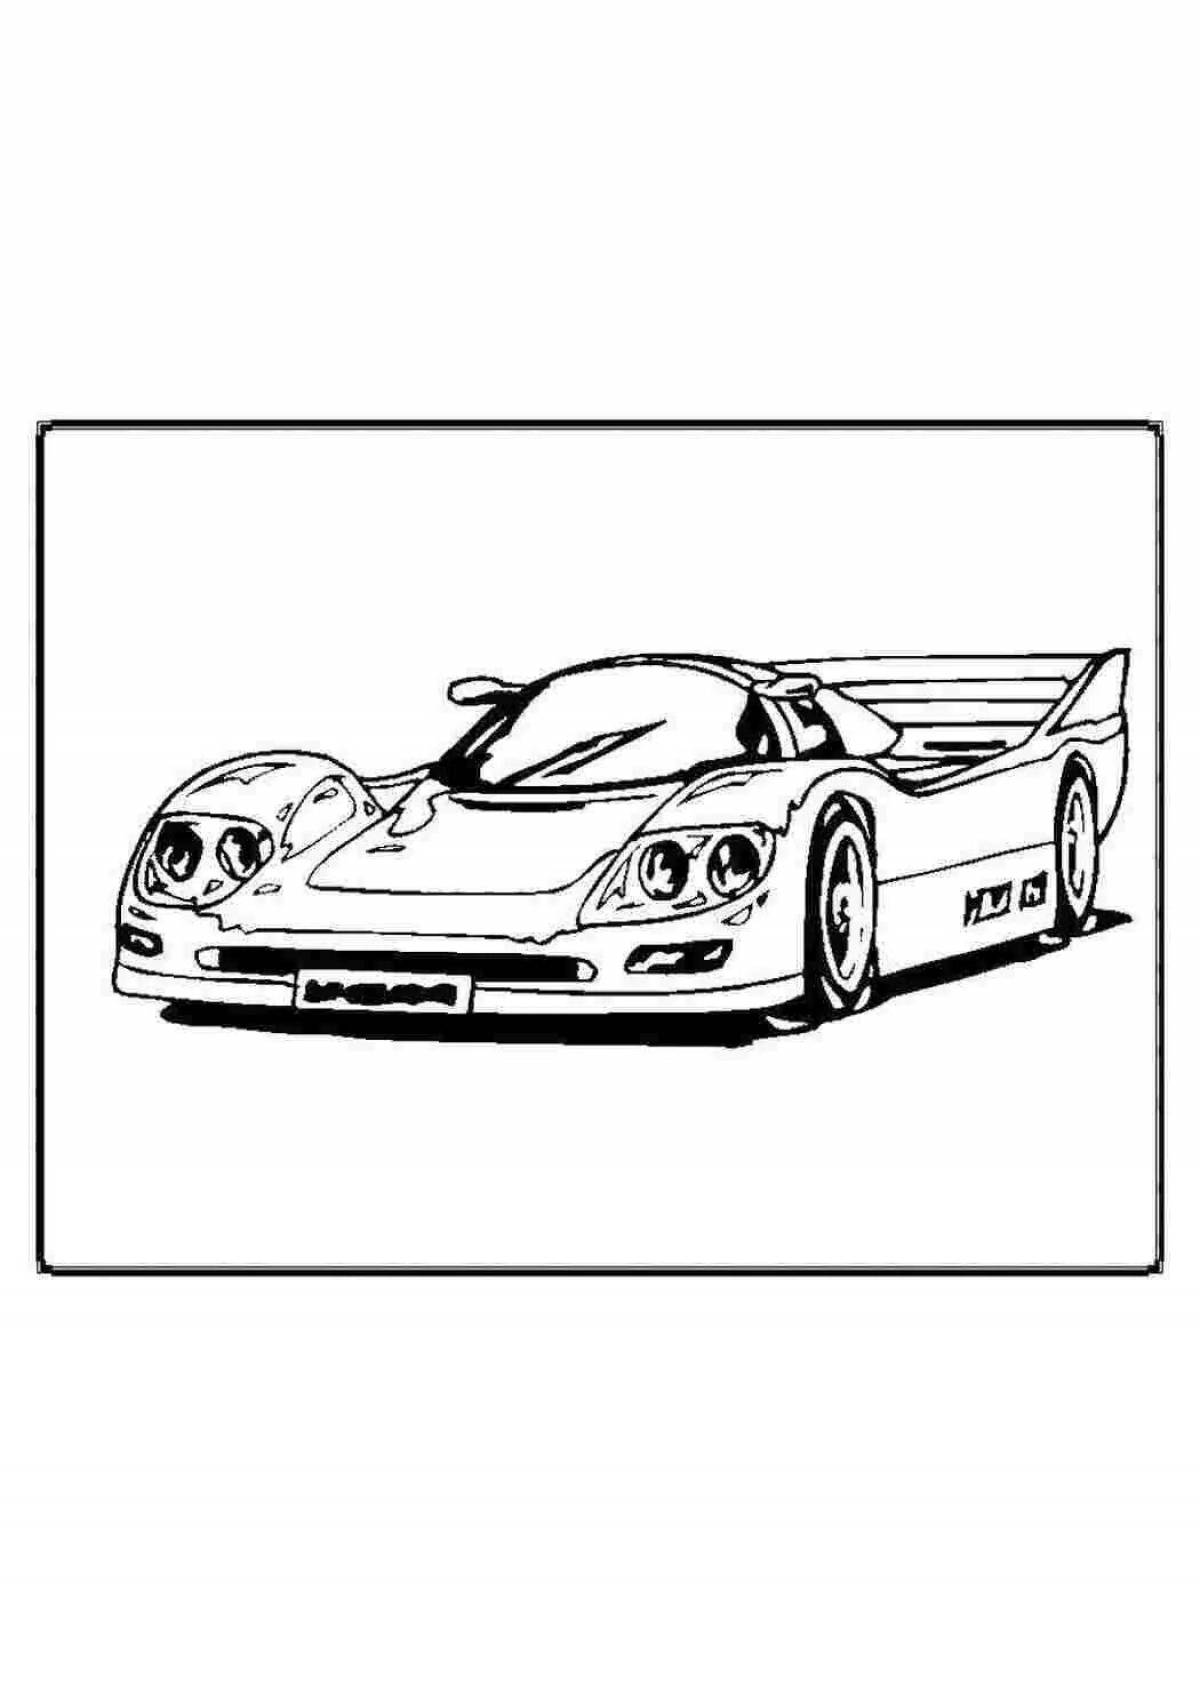 Coloring page playful fast car